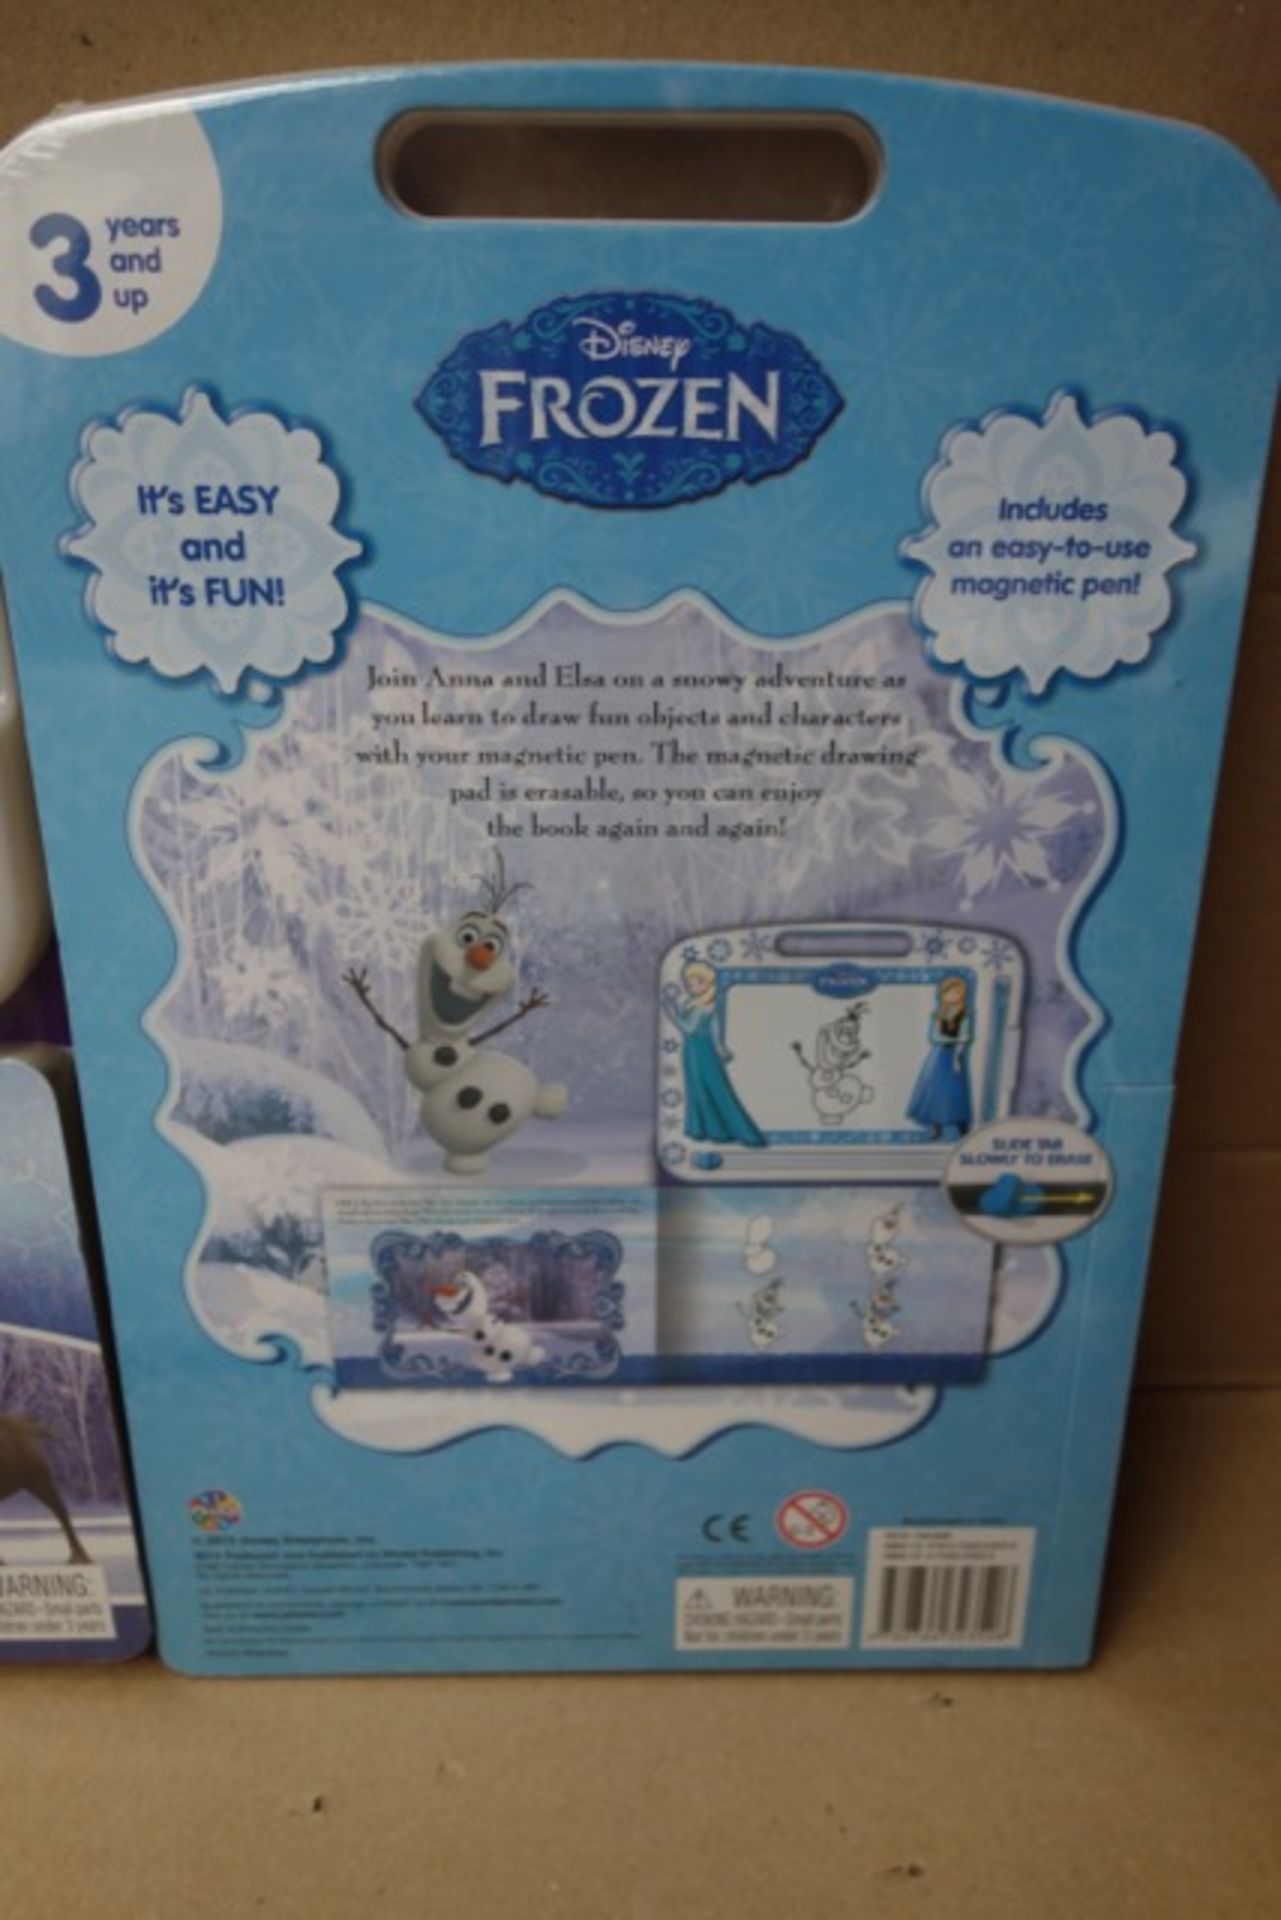 60 x Disney Frozen Storybook & Magnetic Drawing Kit's. It's easy and it's fun! Easy to use mess free - Image 3 of 3